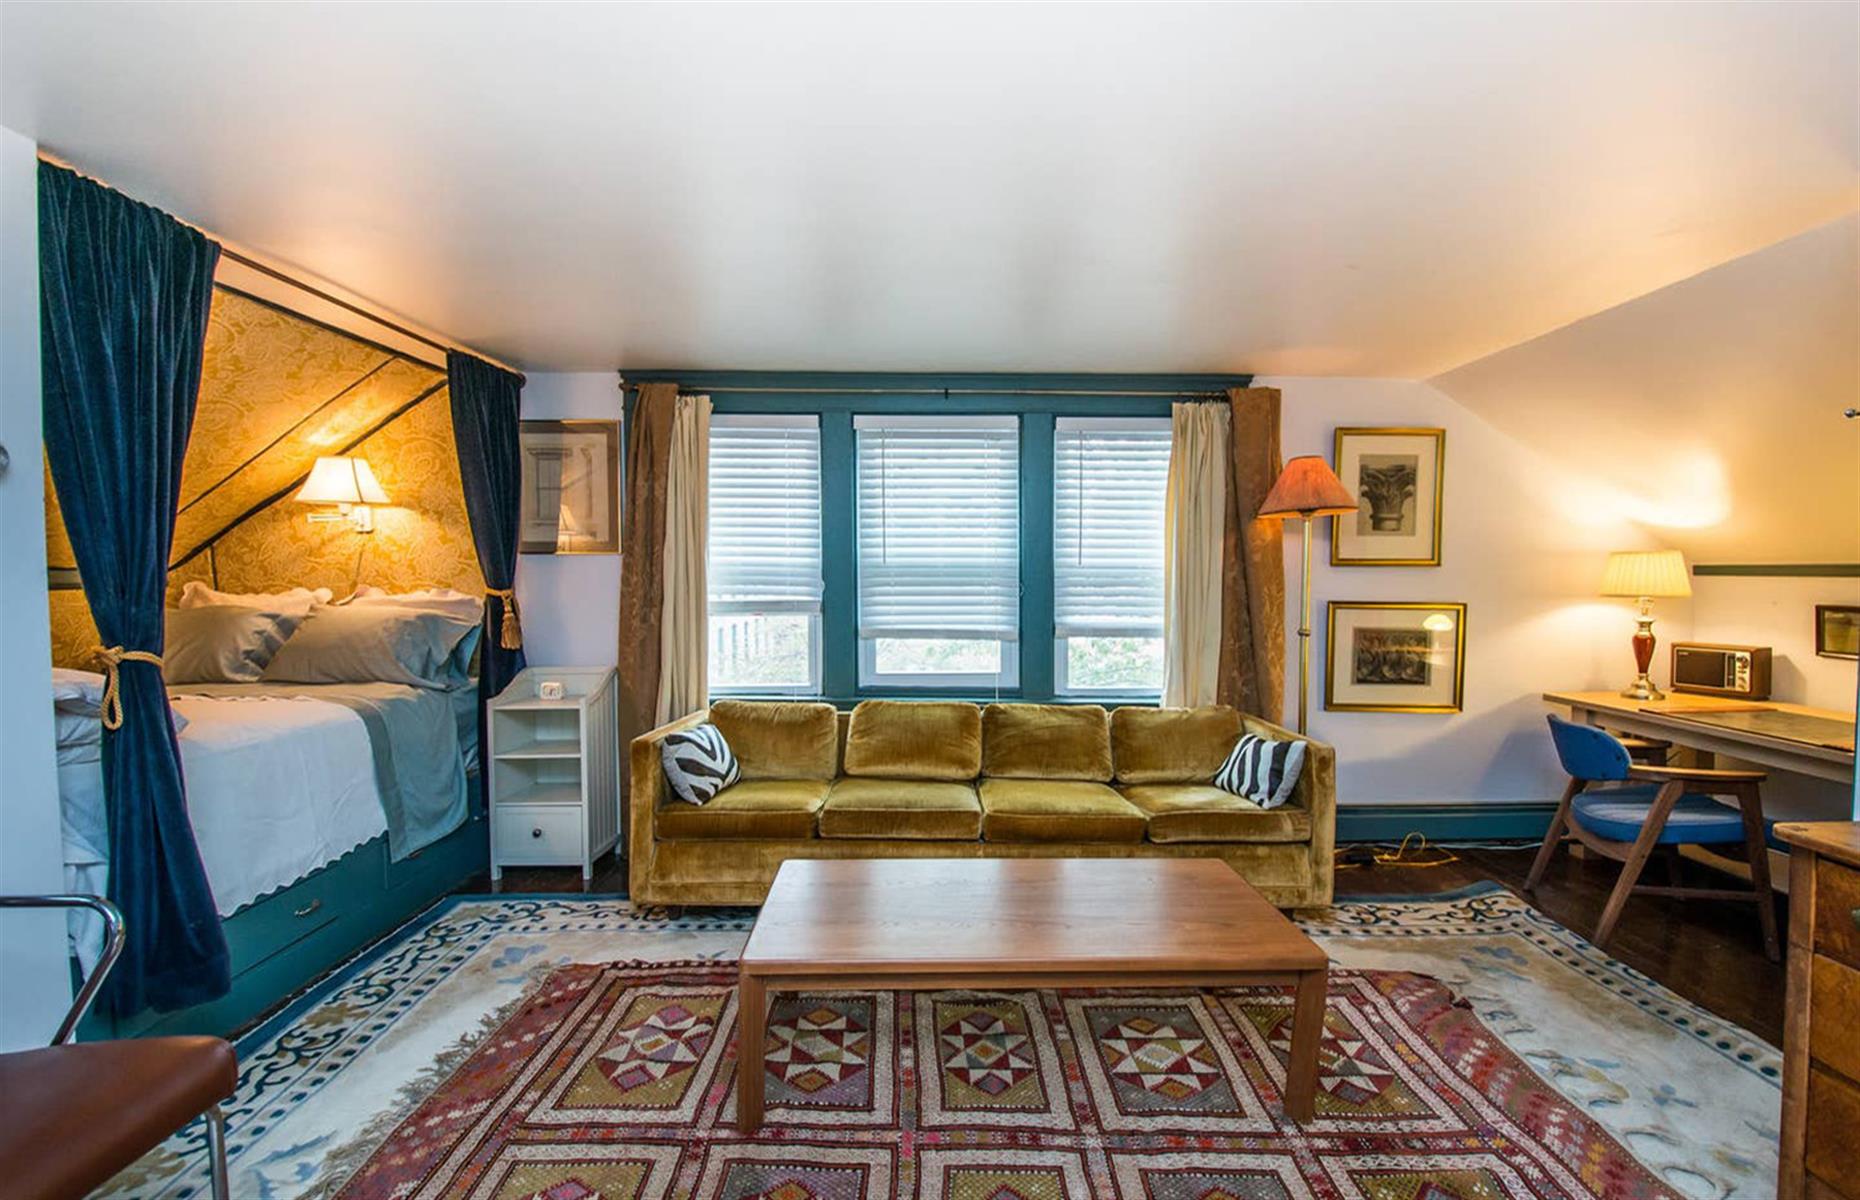 <p>Spread out on the second floor of a beautiful Greek Revival house, <a href="https://www.airbnb.co.uk/rooms/4256677">this cozy loft</a> in Rhode Island is available for $82 a night. The open-plan apartment comes with a king-sized bed, fully equipped kitchen and all the essentials, and is conveniently located in central Providence. History buffs will also appreciate the fact that the house it's tucked away in dates back to 1852. Now discover <a href="https://www.loveexploring.com/galleries/90495/americas-most-charming-historic-downtowns?page=1">America's most beautiful and historic downtowns</a>. </p>